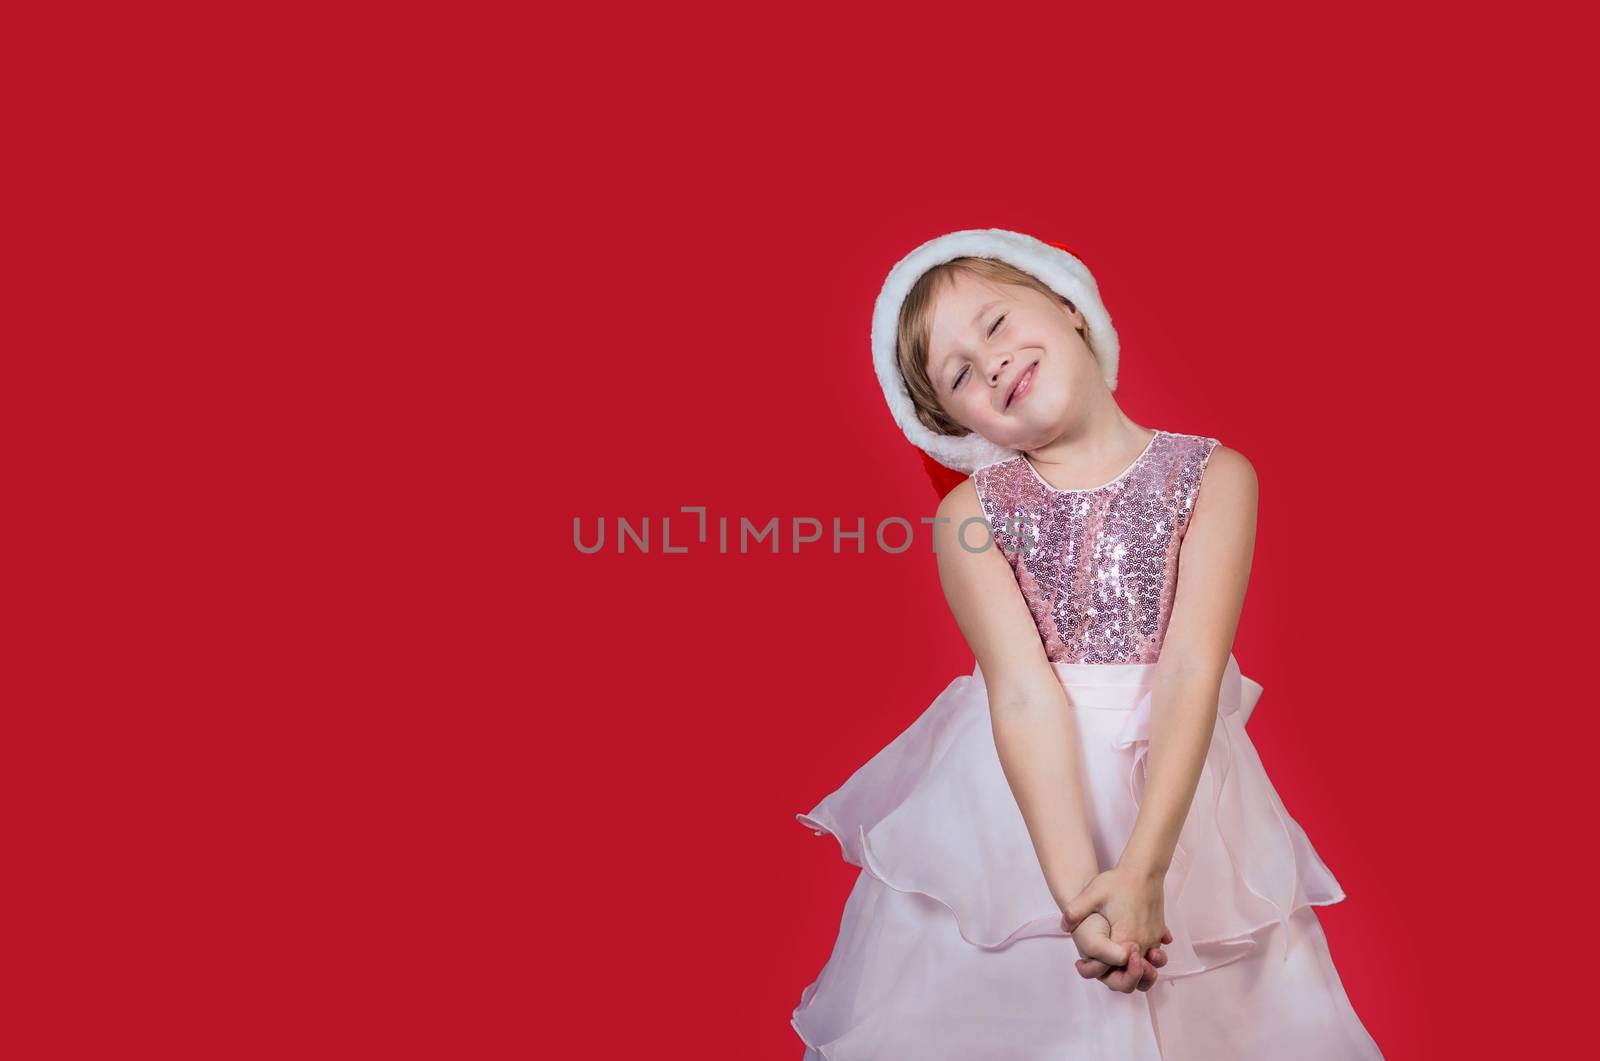 Adorable funny cacusian little girl in santa hat sweetly stretching with her eyes shut celebrating happy New Year isolated on red background. Merry Christmas presents shopping sale.